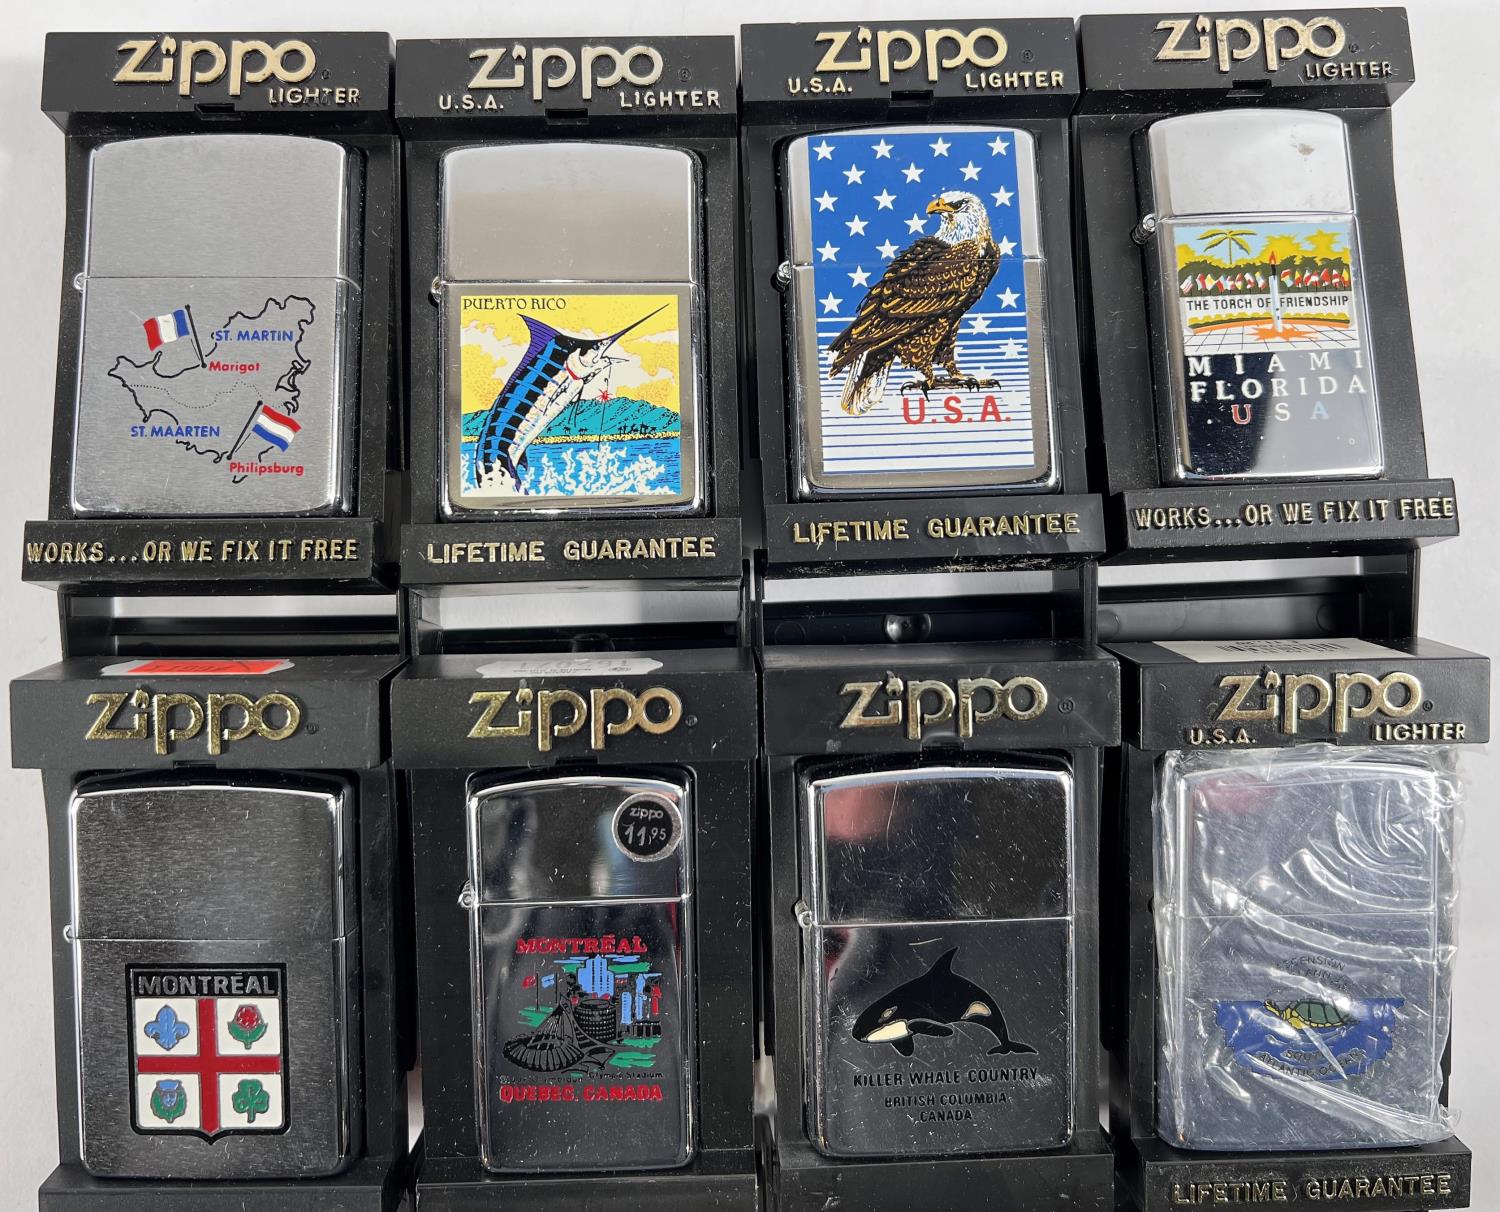 Eight various Zippo lighters for various countries, cities etc, USA, British Columbia, Montreal,